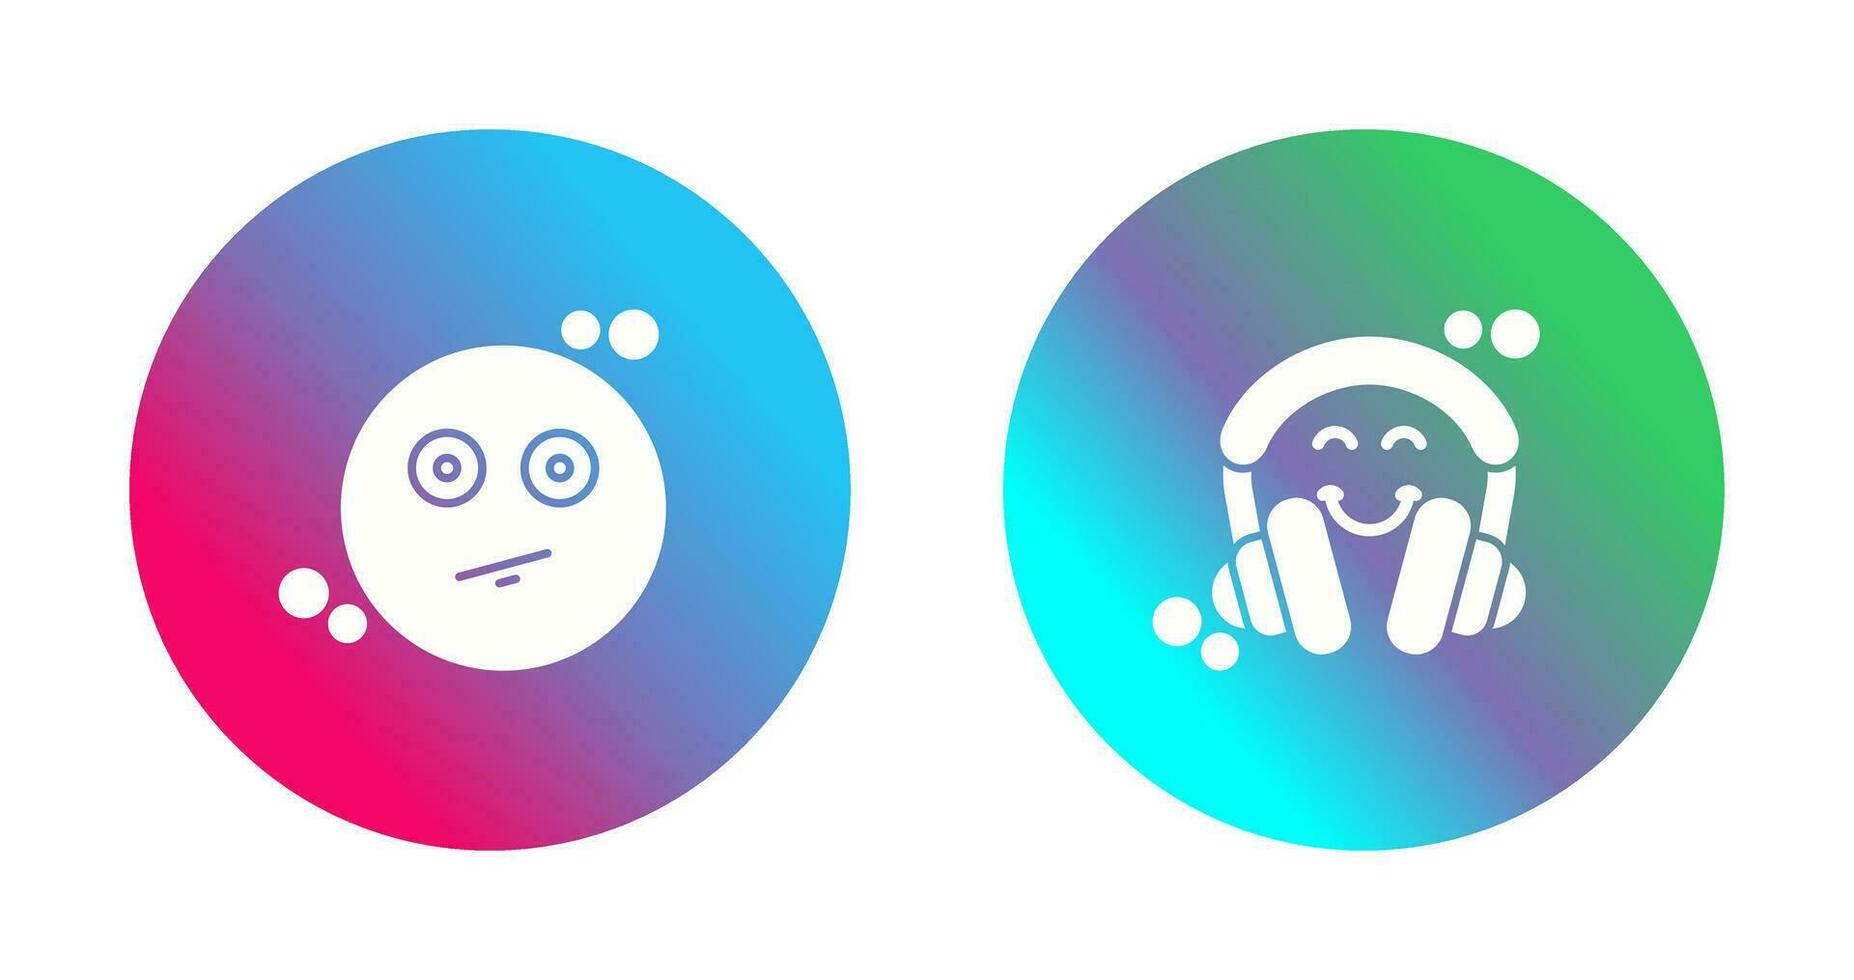 Neutral and Headphones Icon vector